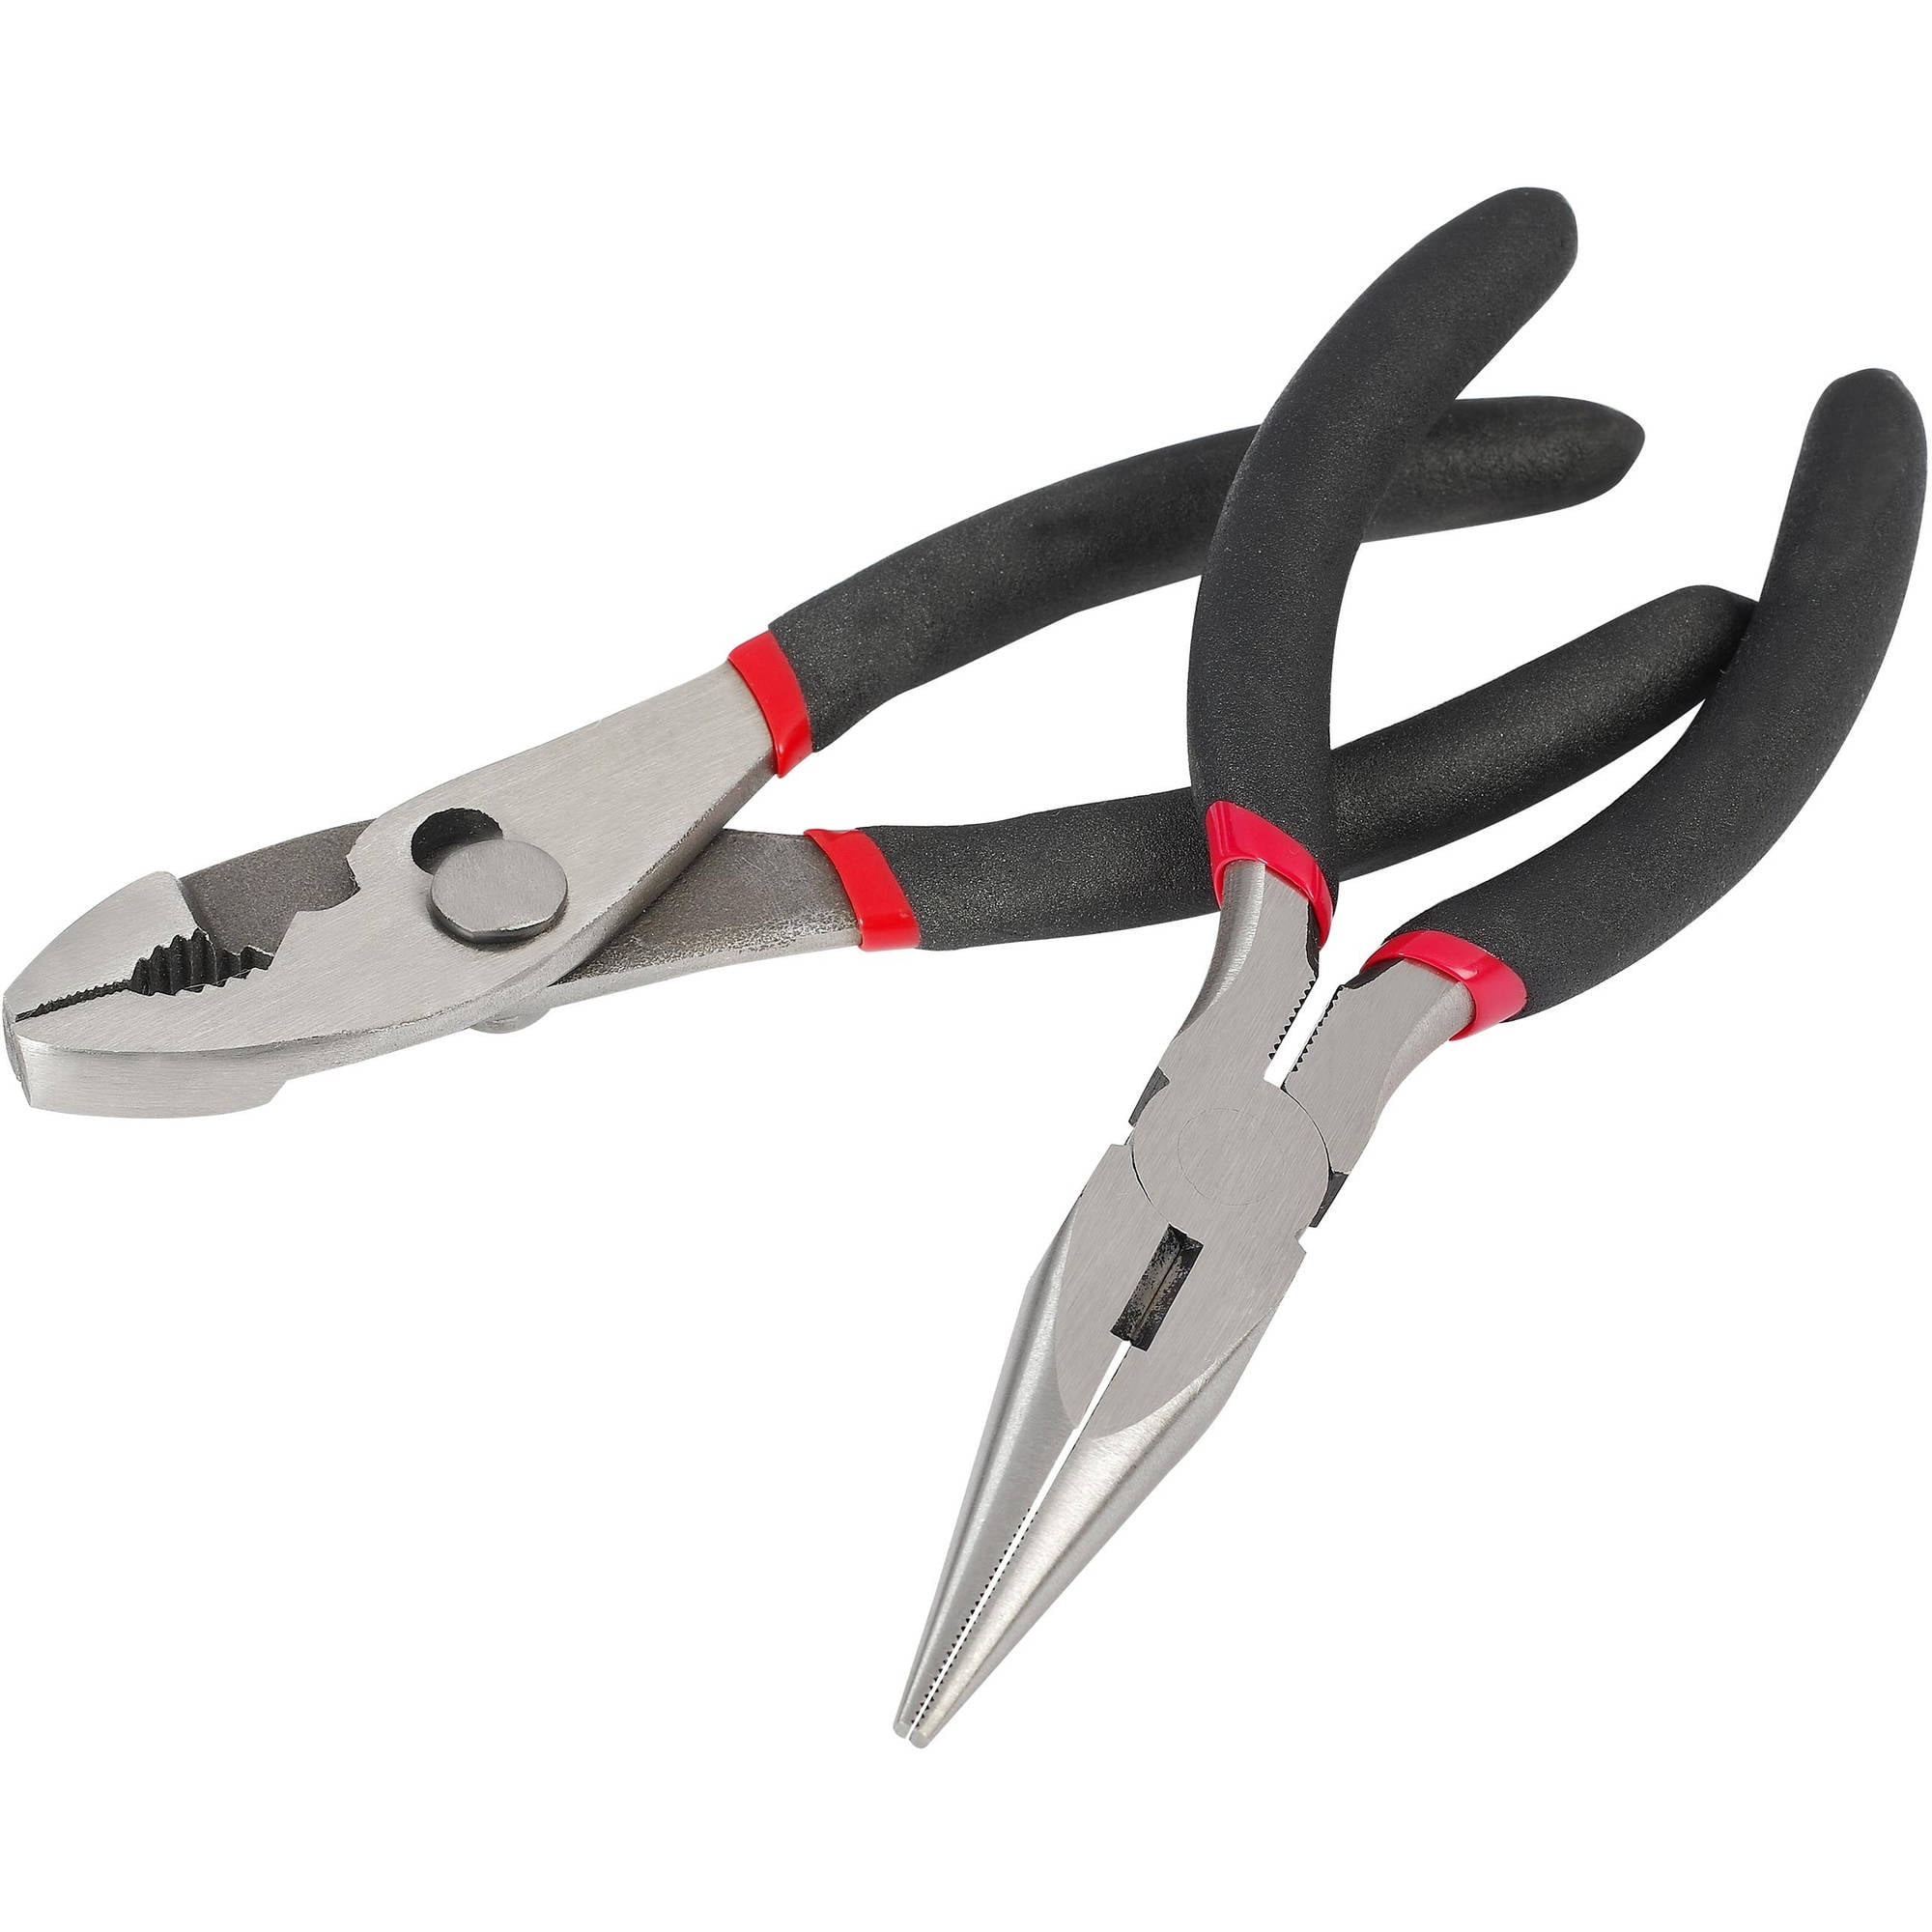 Mini Needle Nose Pliers 5-5 Pack KAIHAOWIN Small Long Nose Pliers with  Wire Cutters, Spring Loaded Thin Needle Nose Pliers, Precision Pliers Set  for